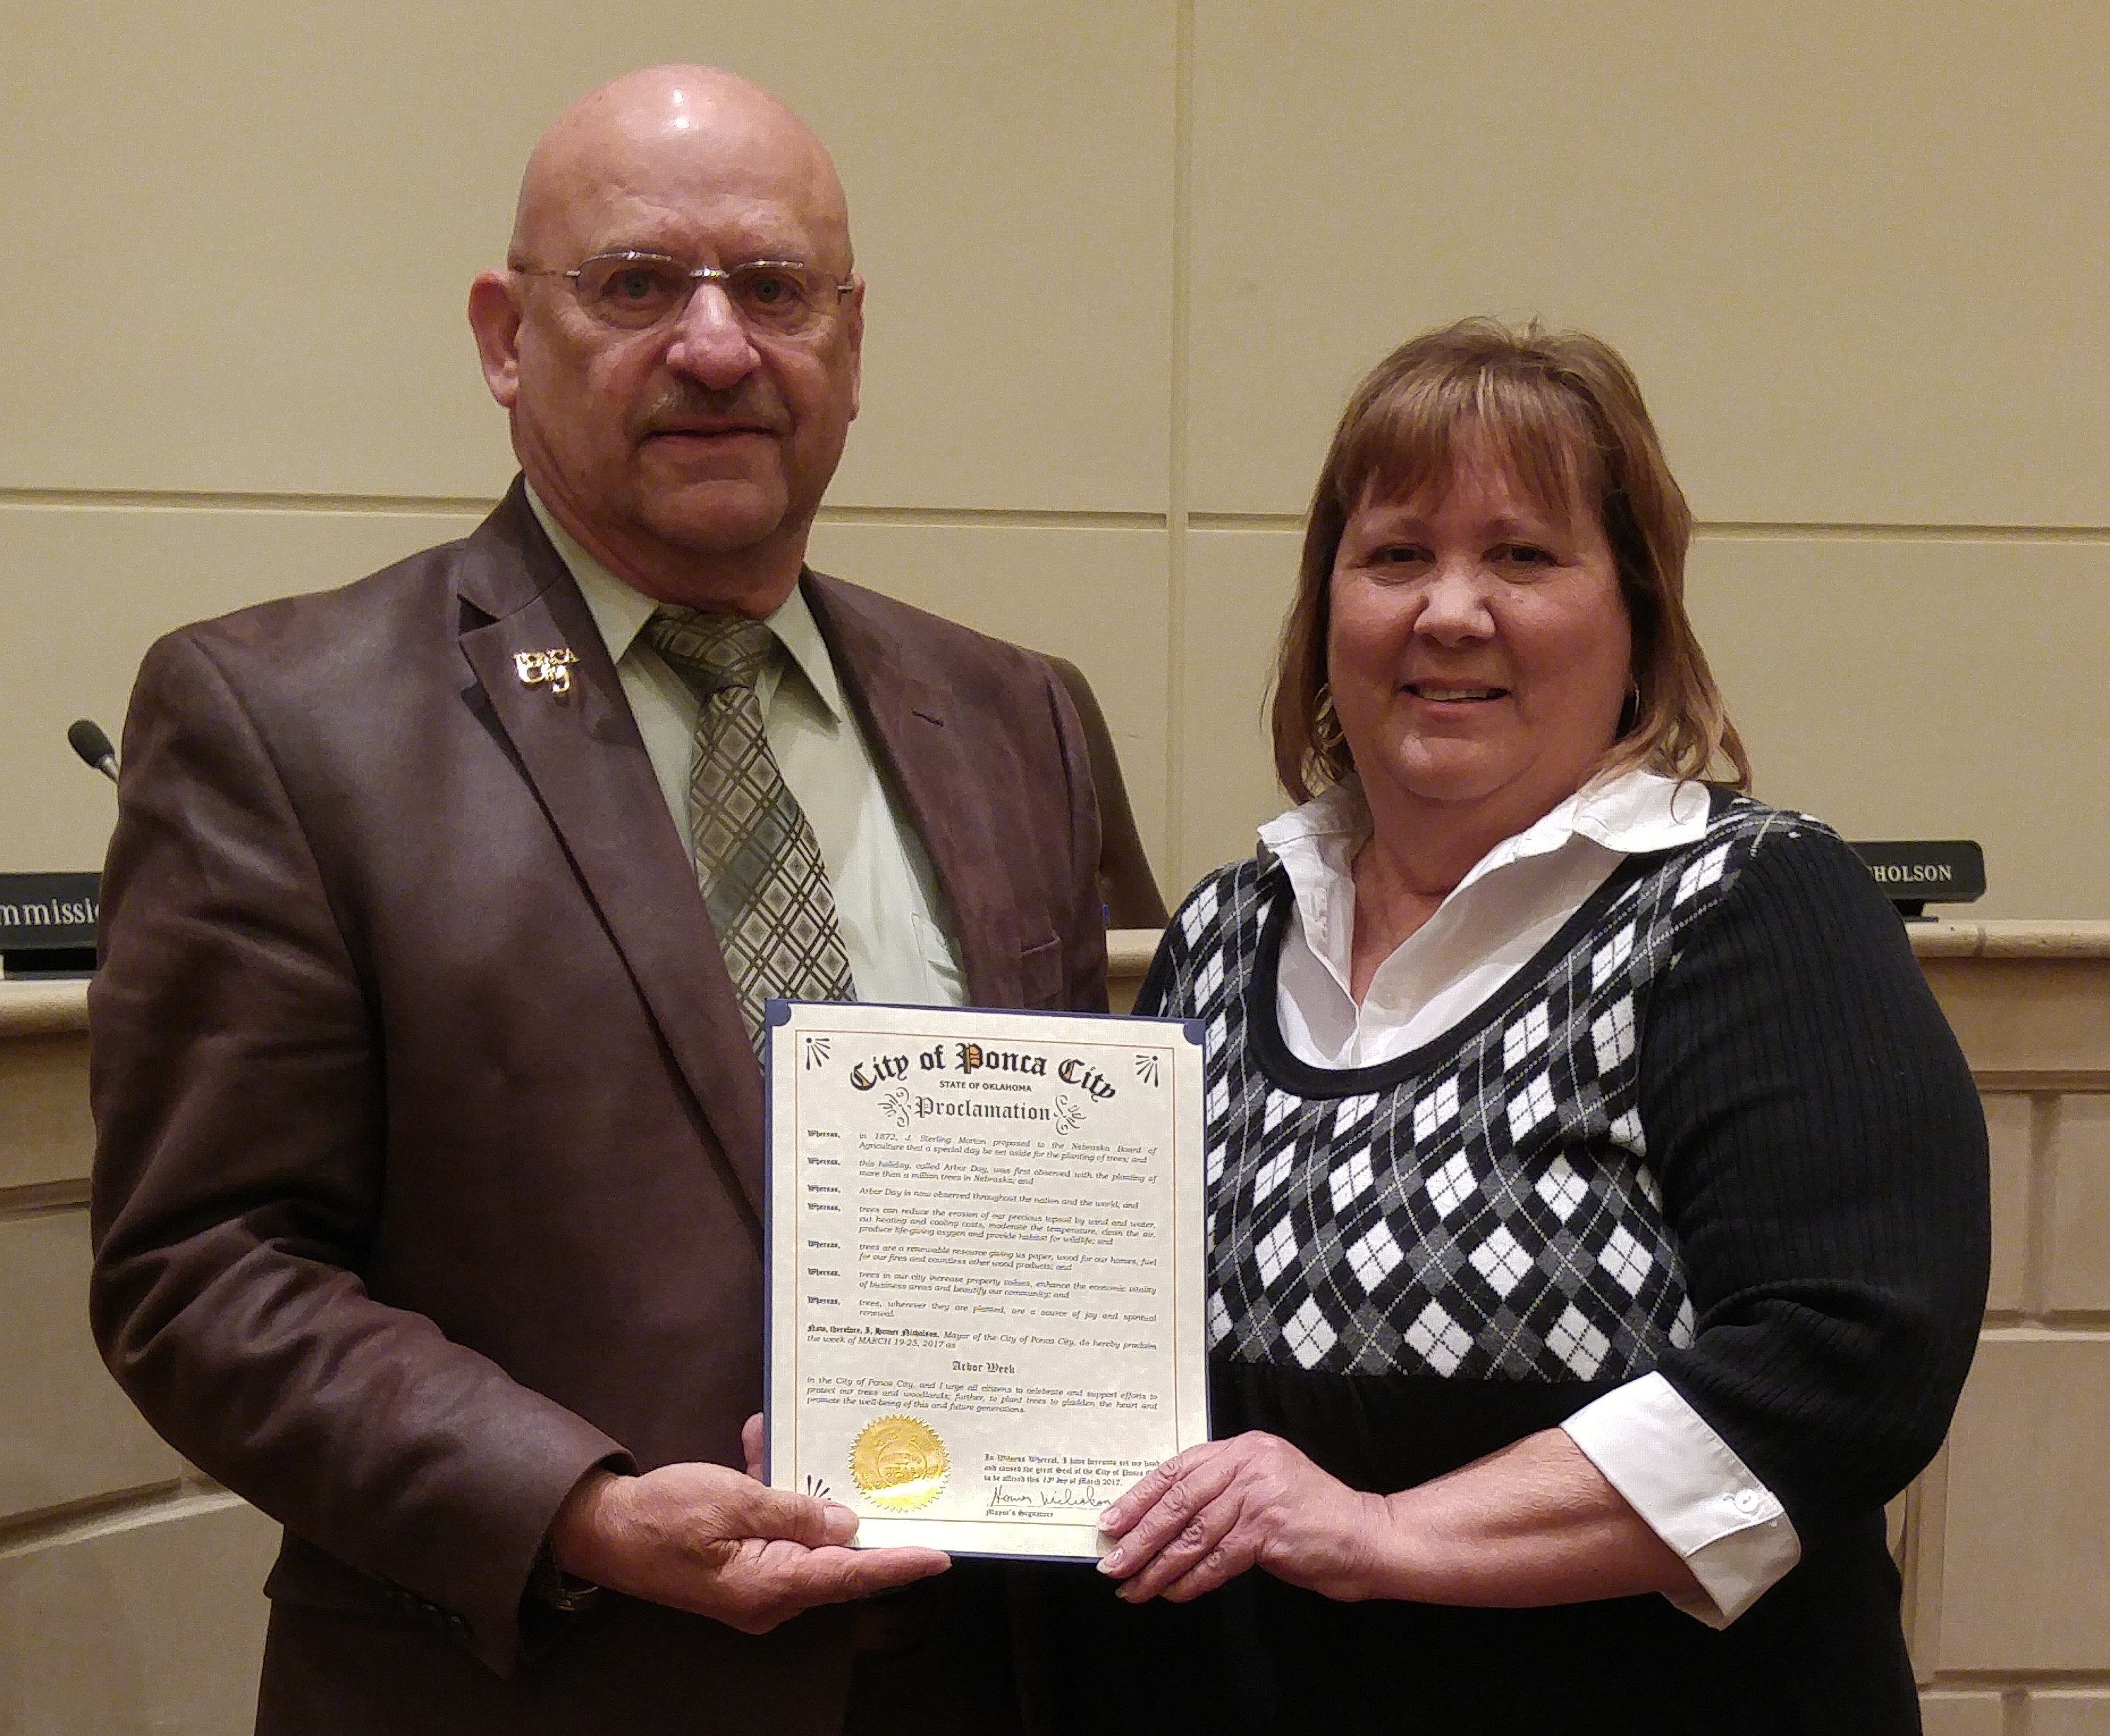 Mayor proclaims Arbor Week for March 19-25